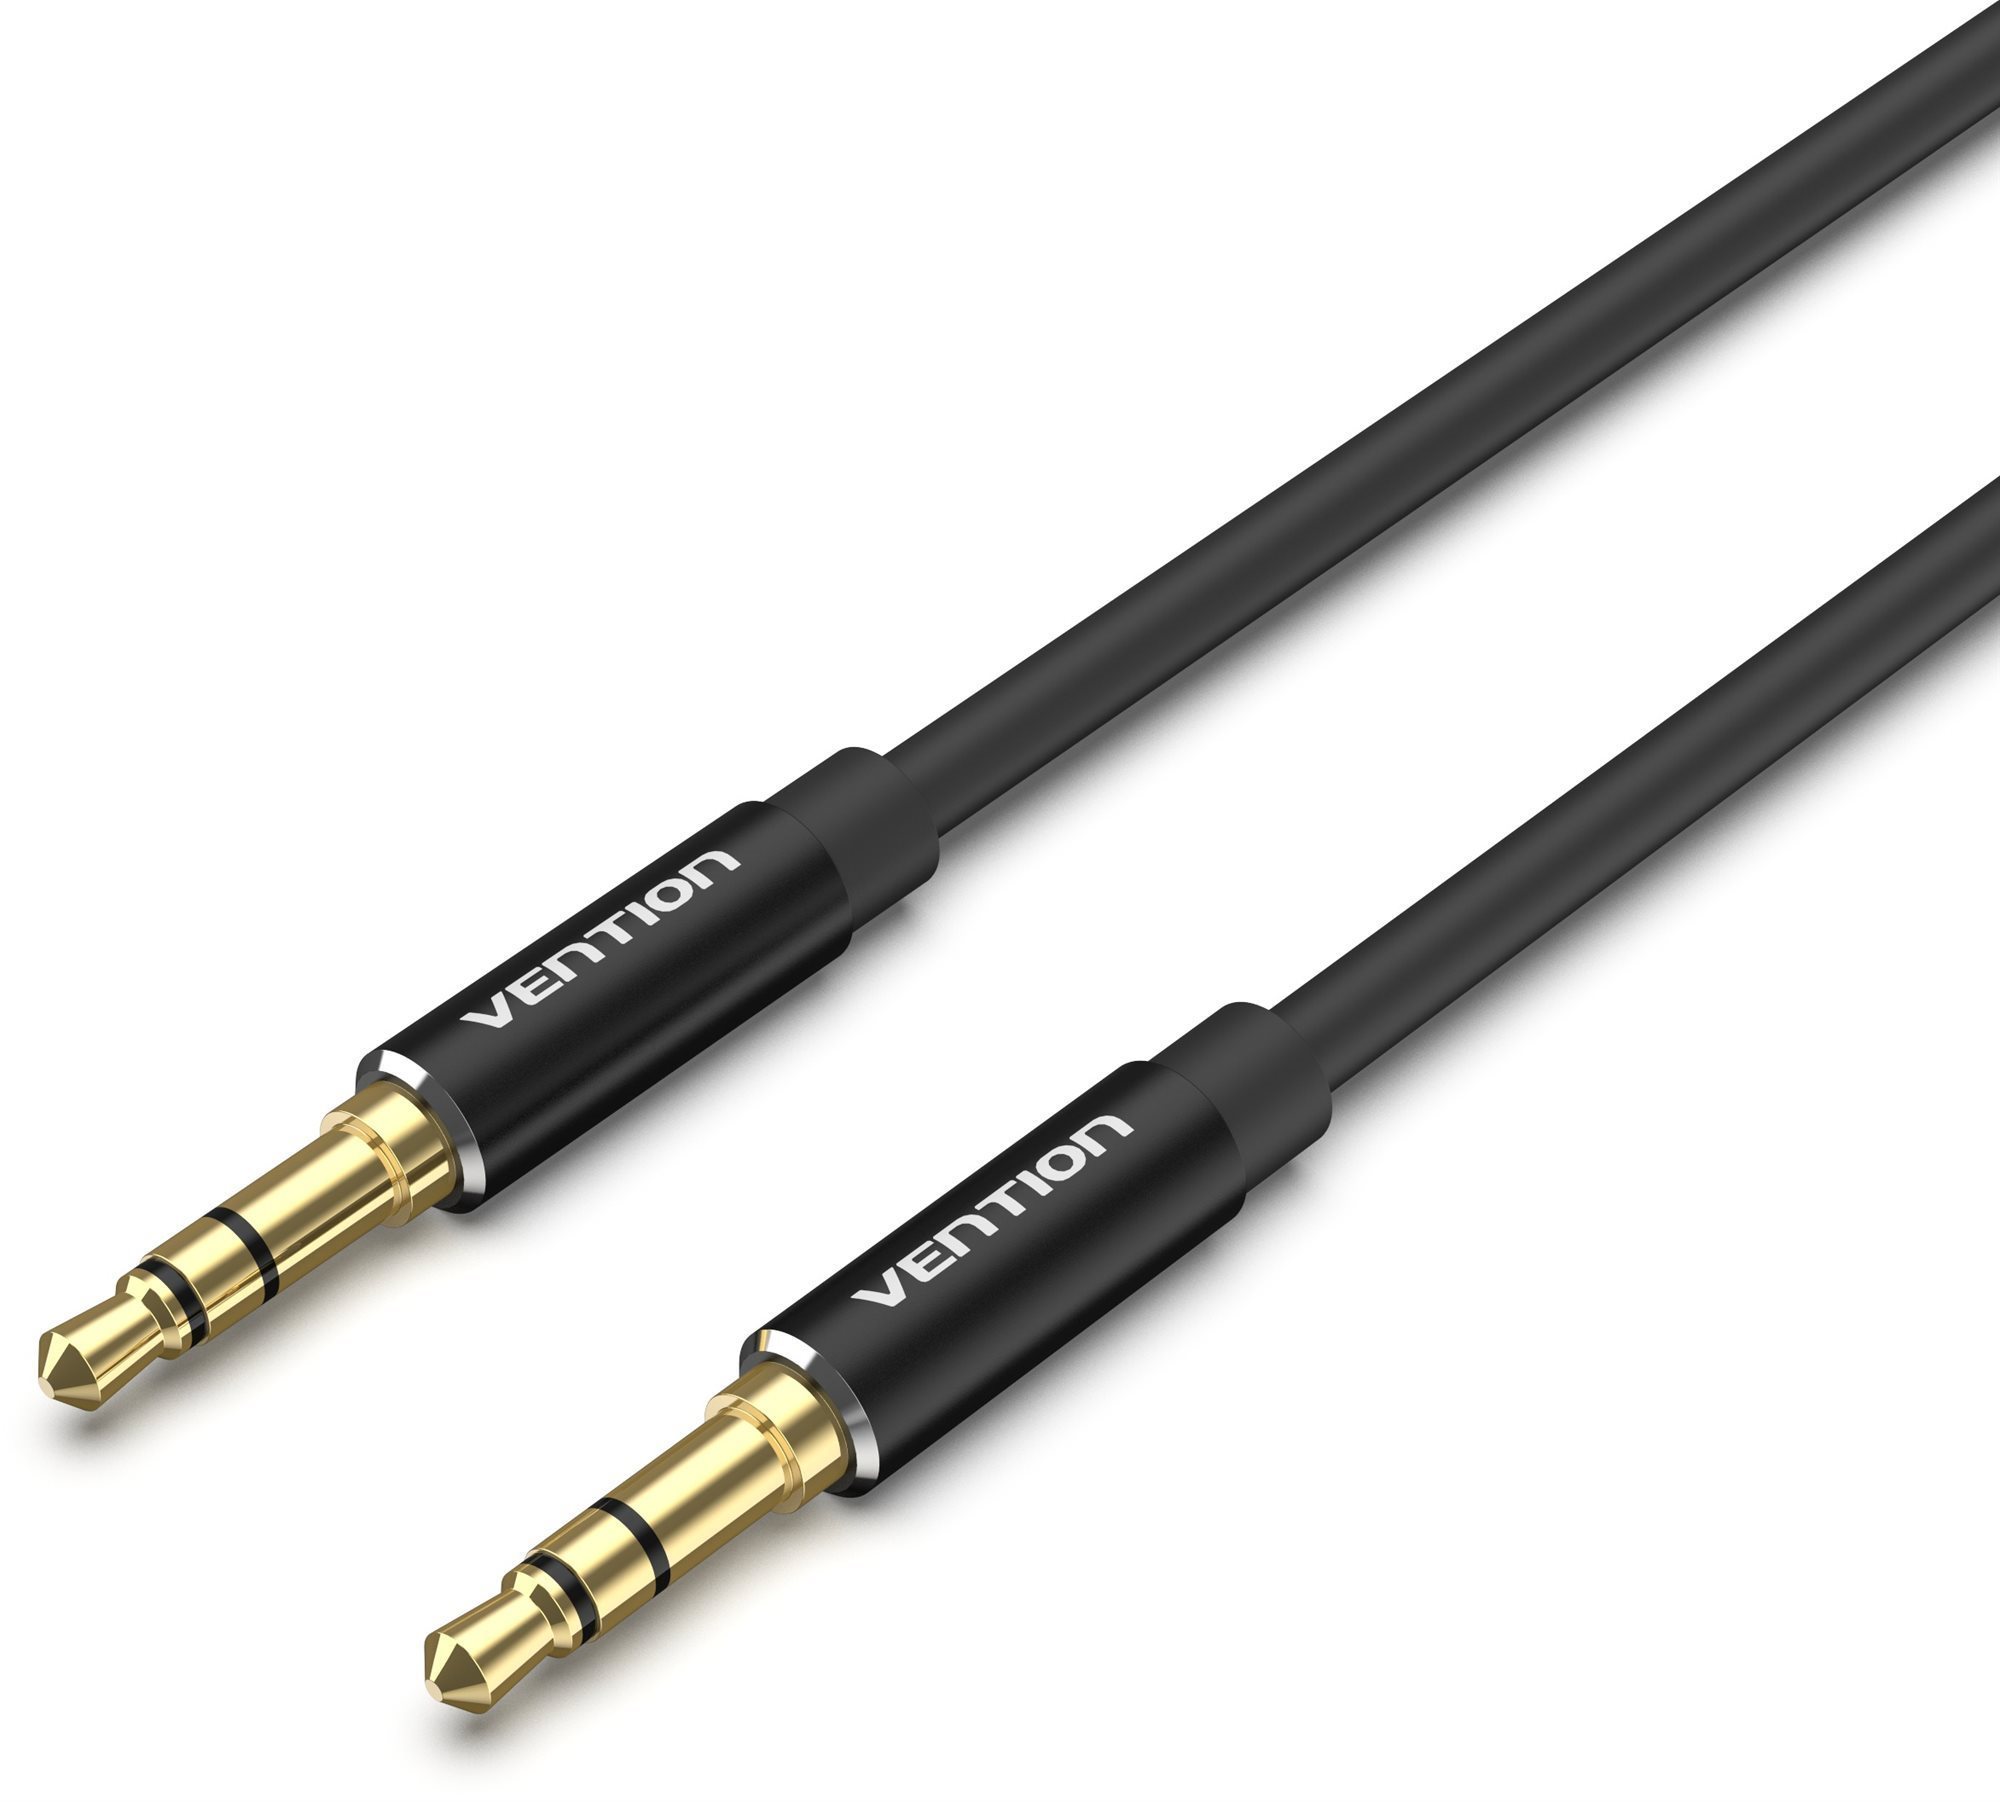 Vention 3,5 mm Male to Male Audio Cable 5 m Black Aluminum Alloy Type